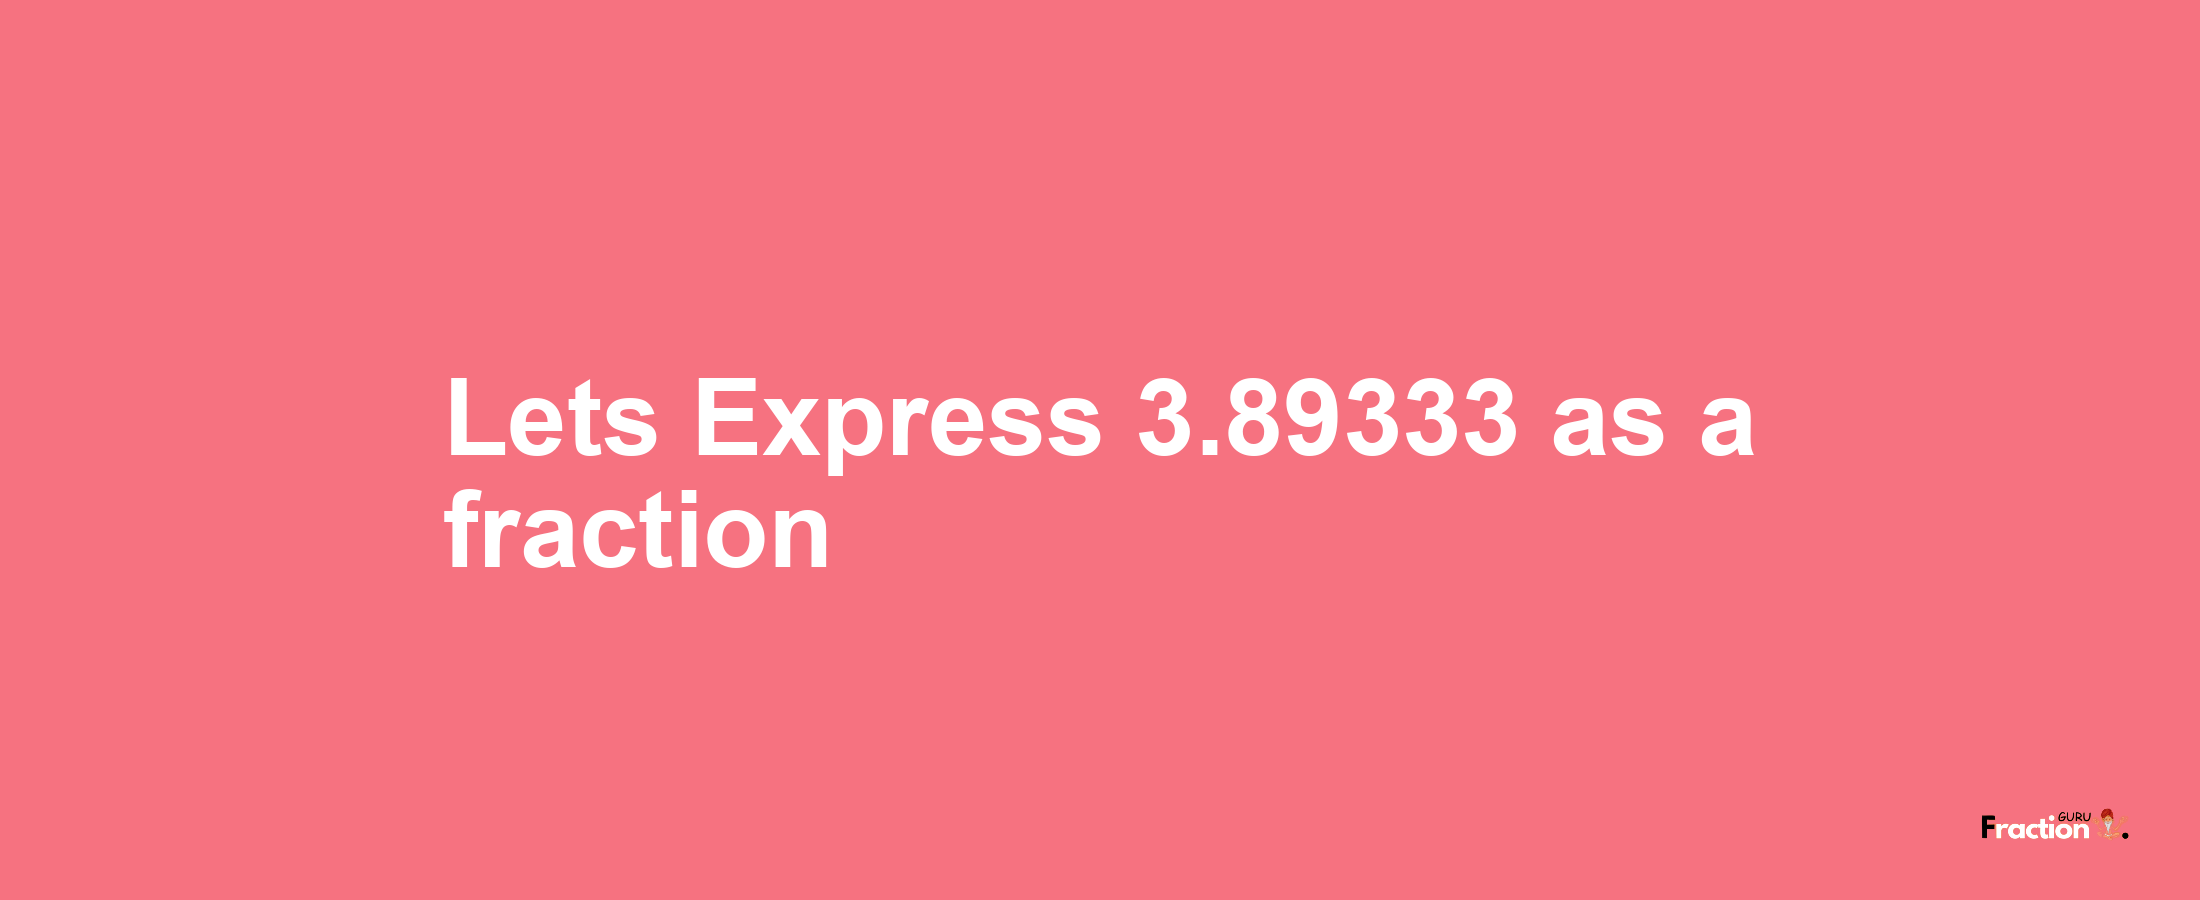 Lets Express 3.89333 as afraction